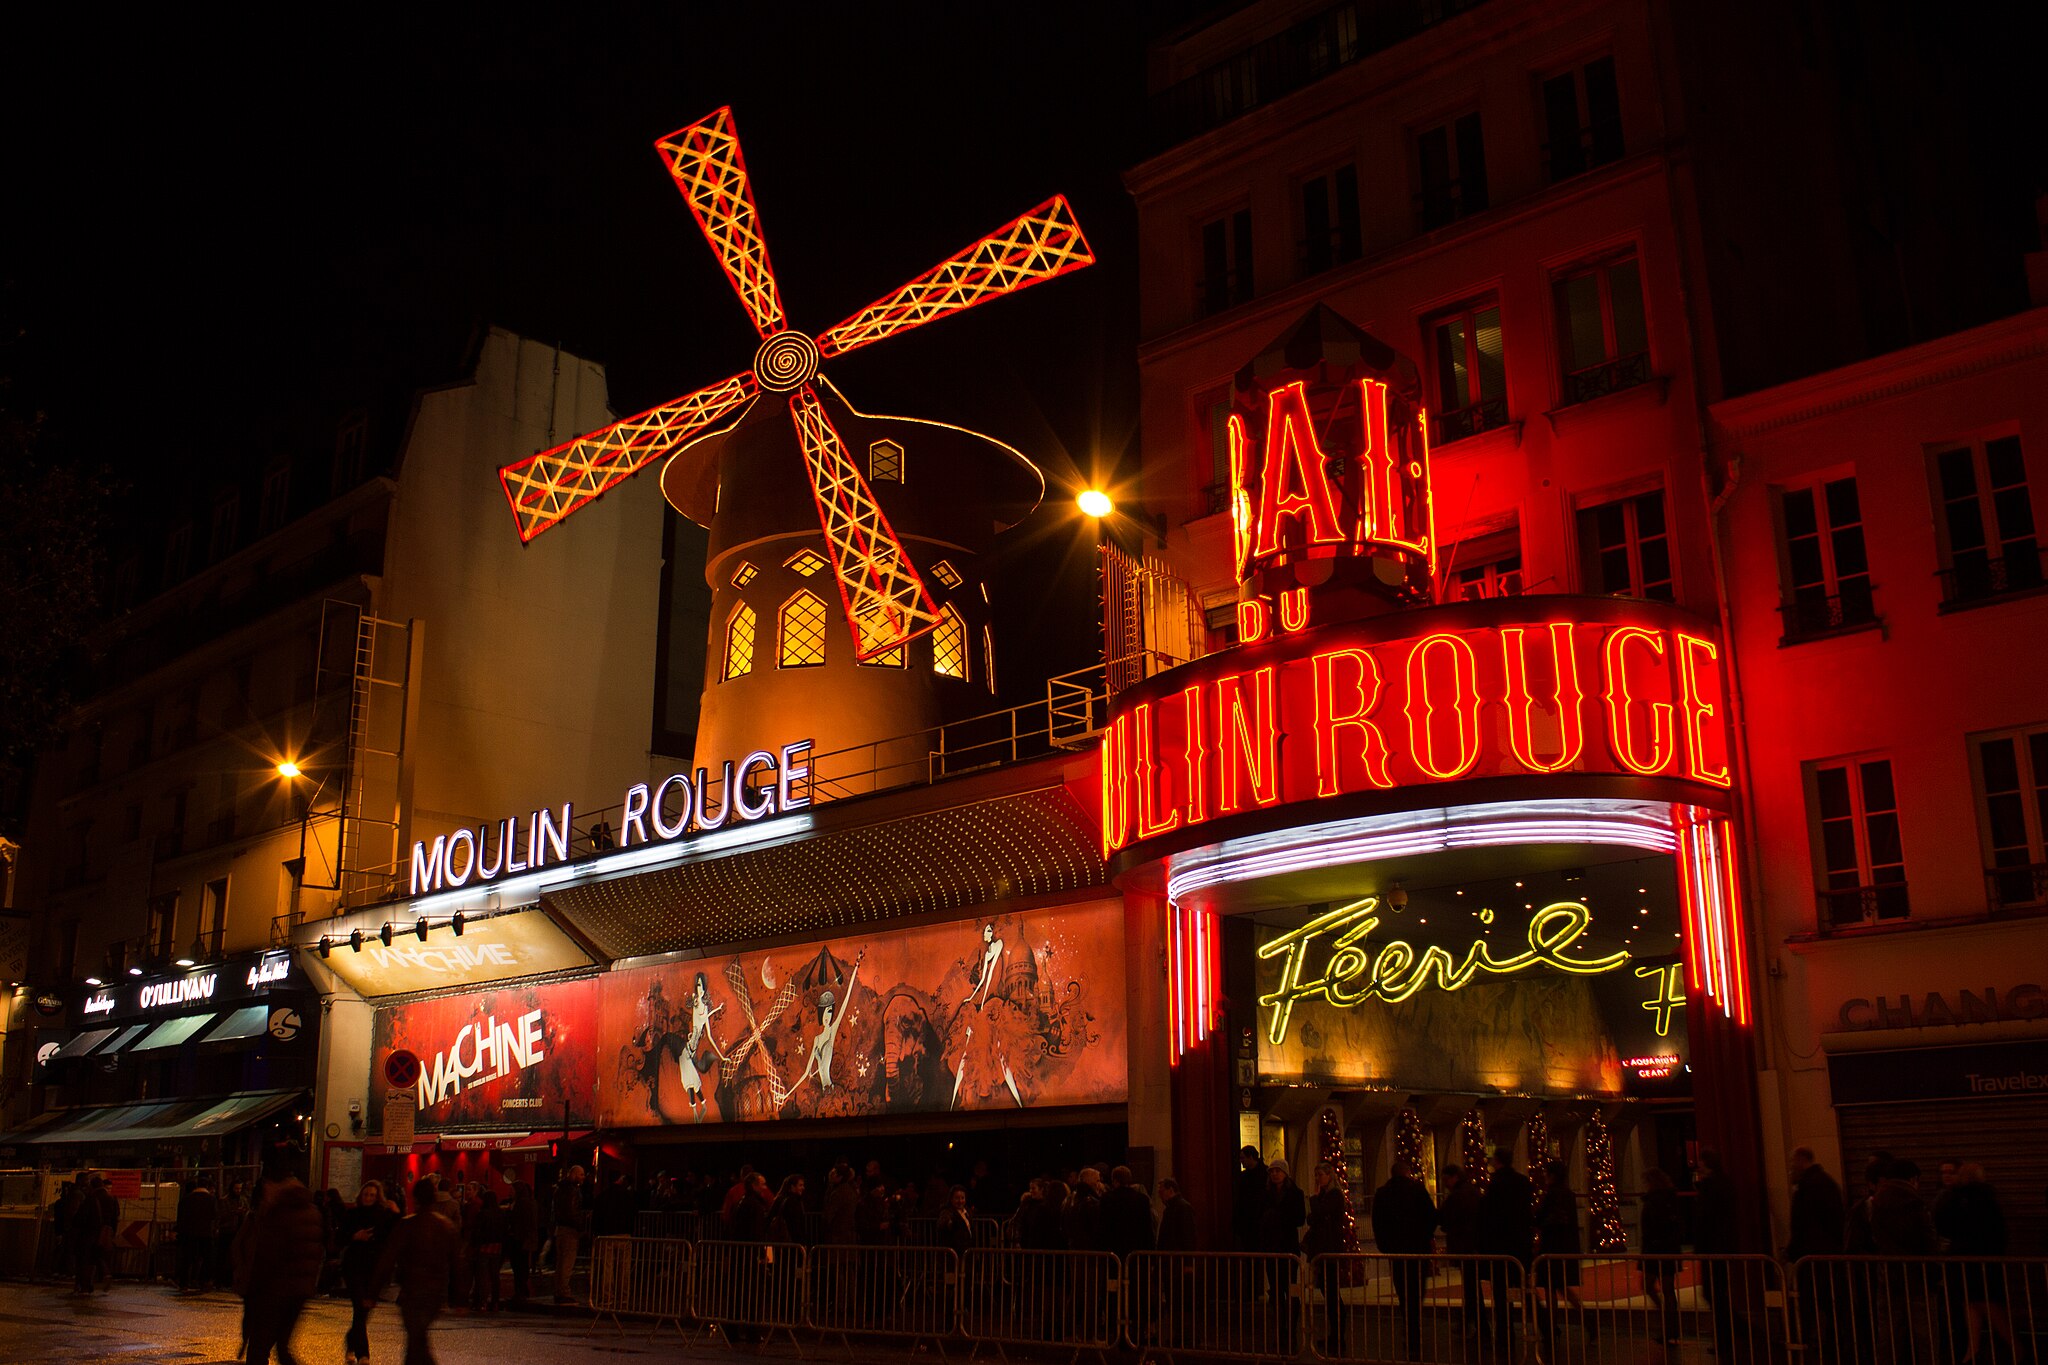 Cina in Turnul Eiffel, excursie cu barca si spectacol Moulin Rouge by Perfect Tour image0